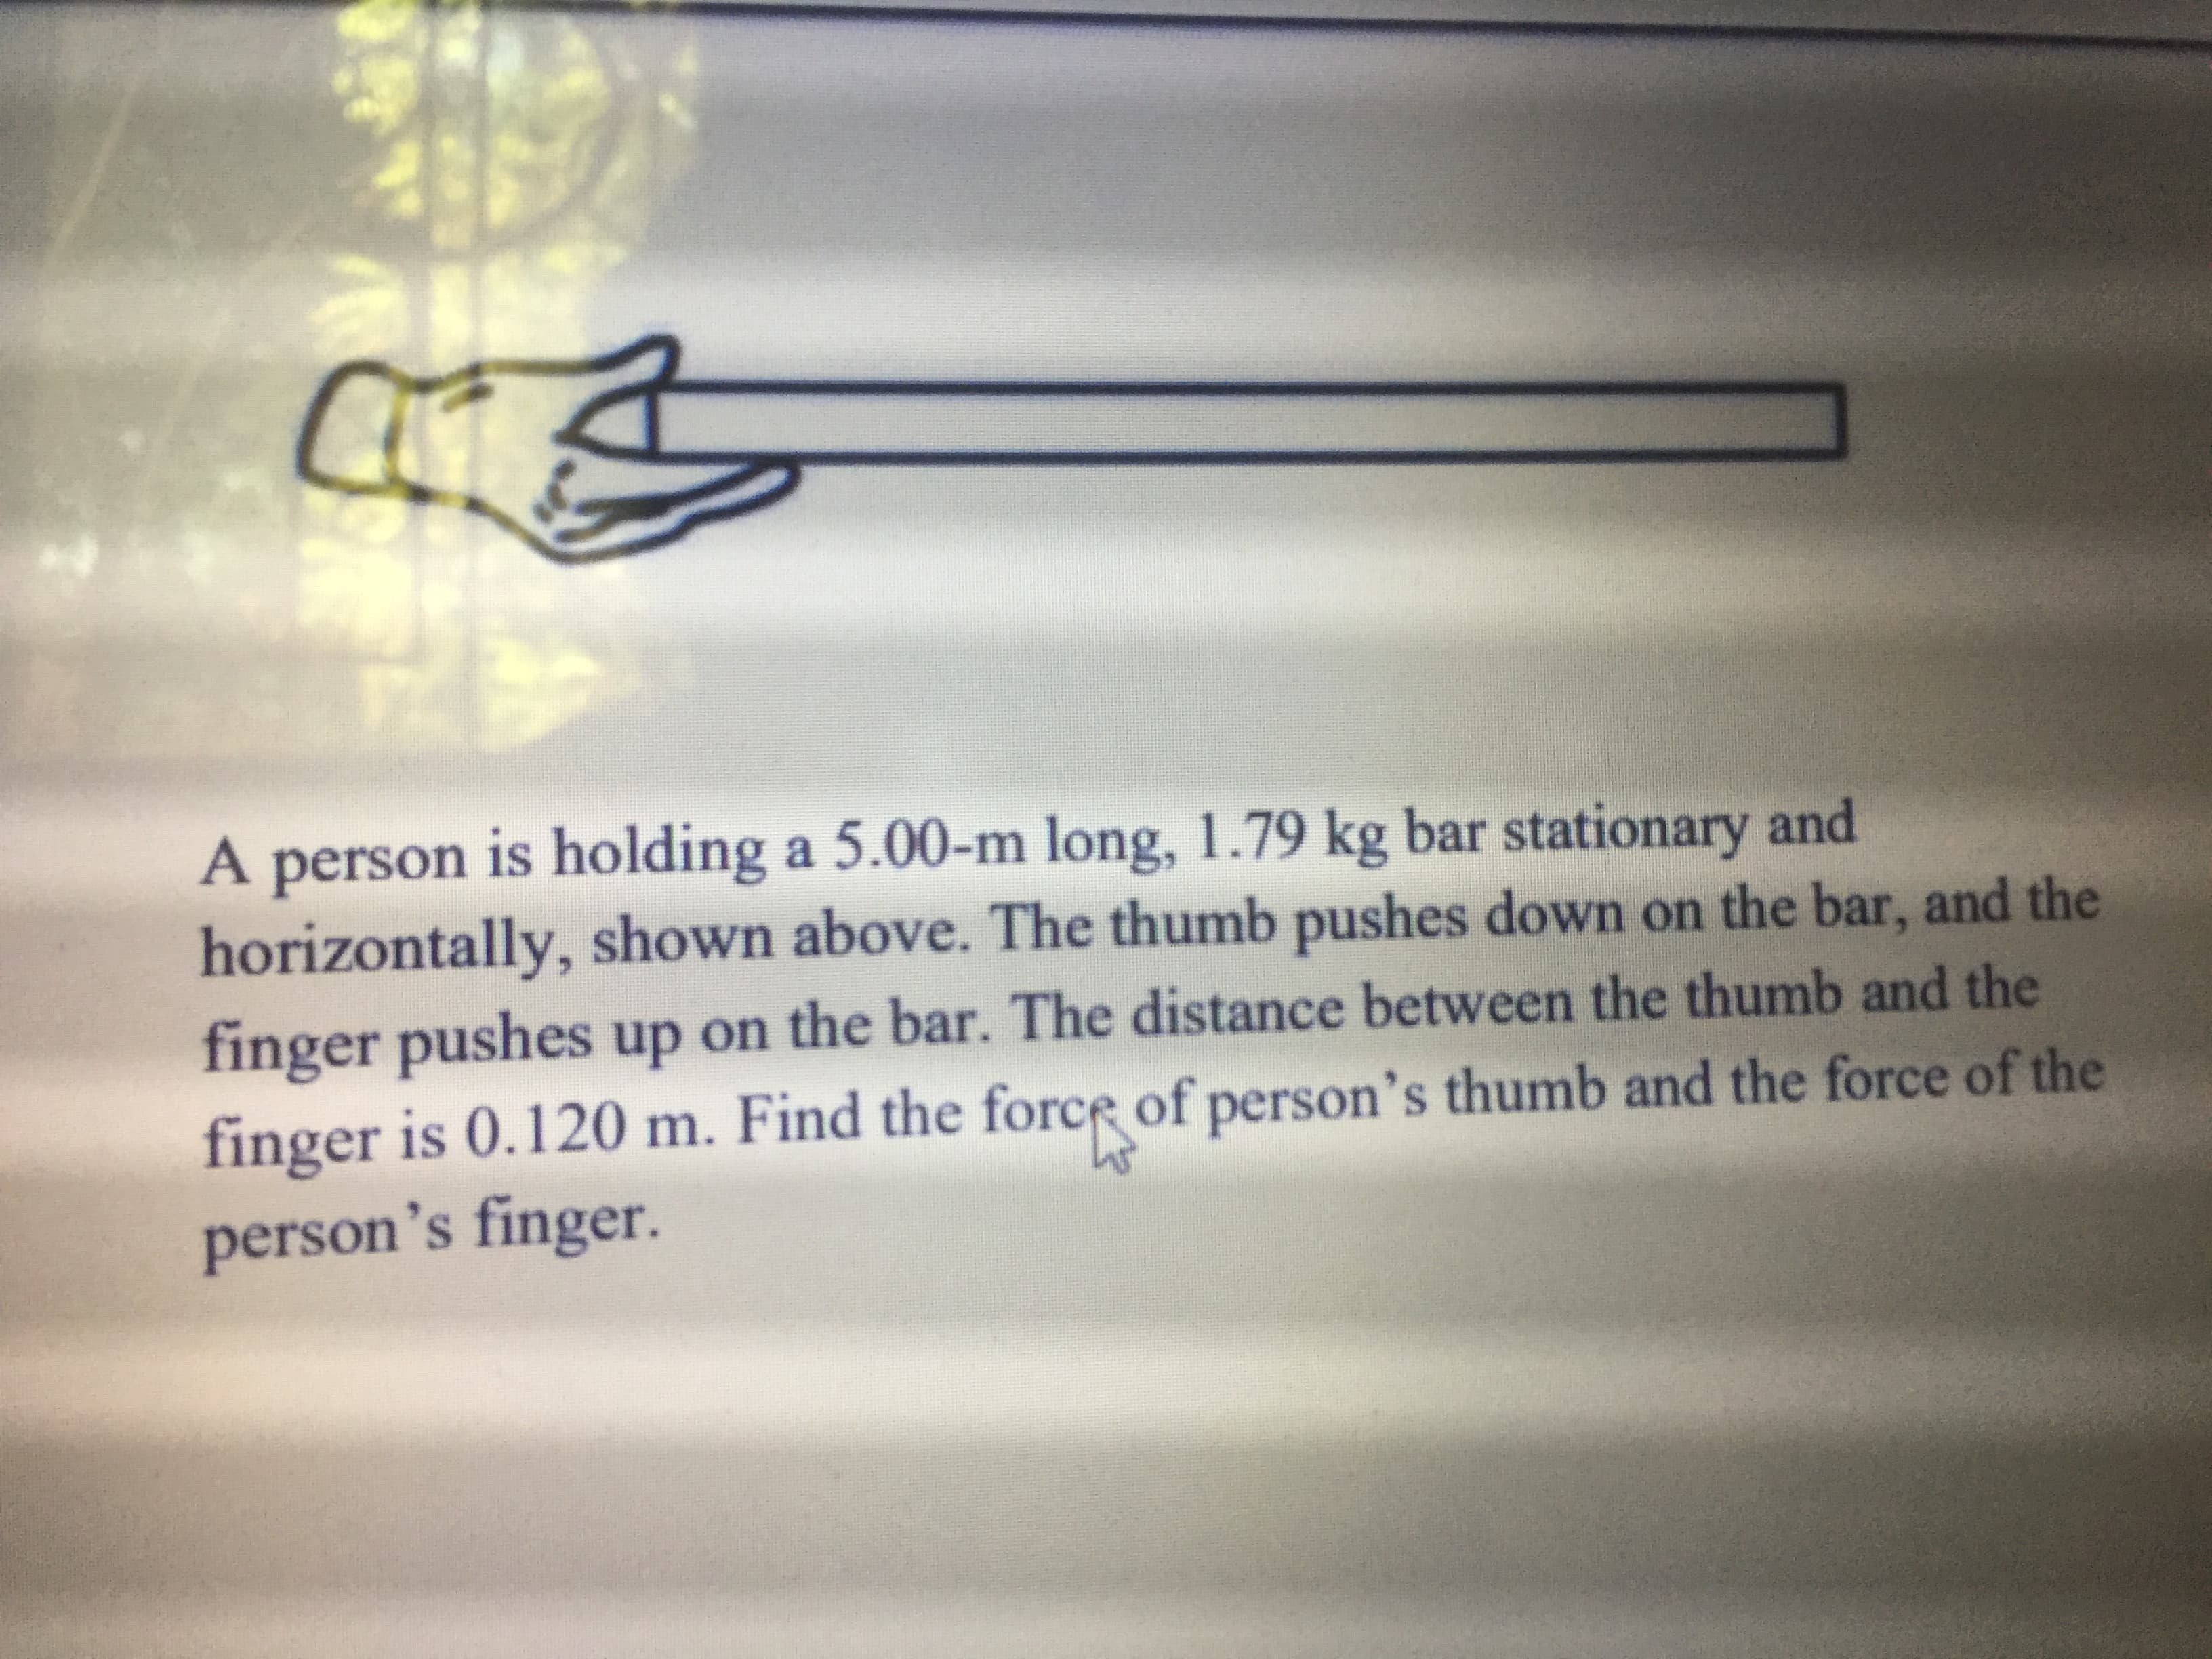 A person is holding a 5.00-m long, 1.79 kg bar stationary and
horizontally, shown above. The thumb pushes down on the bar, and the
finger pushes up on the bar. The distance between the thumb and the
finger is 0.120 m. Find the force of person's thumb and the force of the
person's finger.
